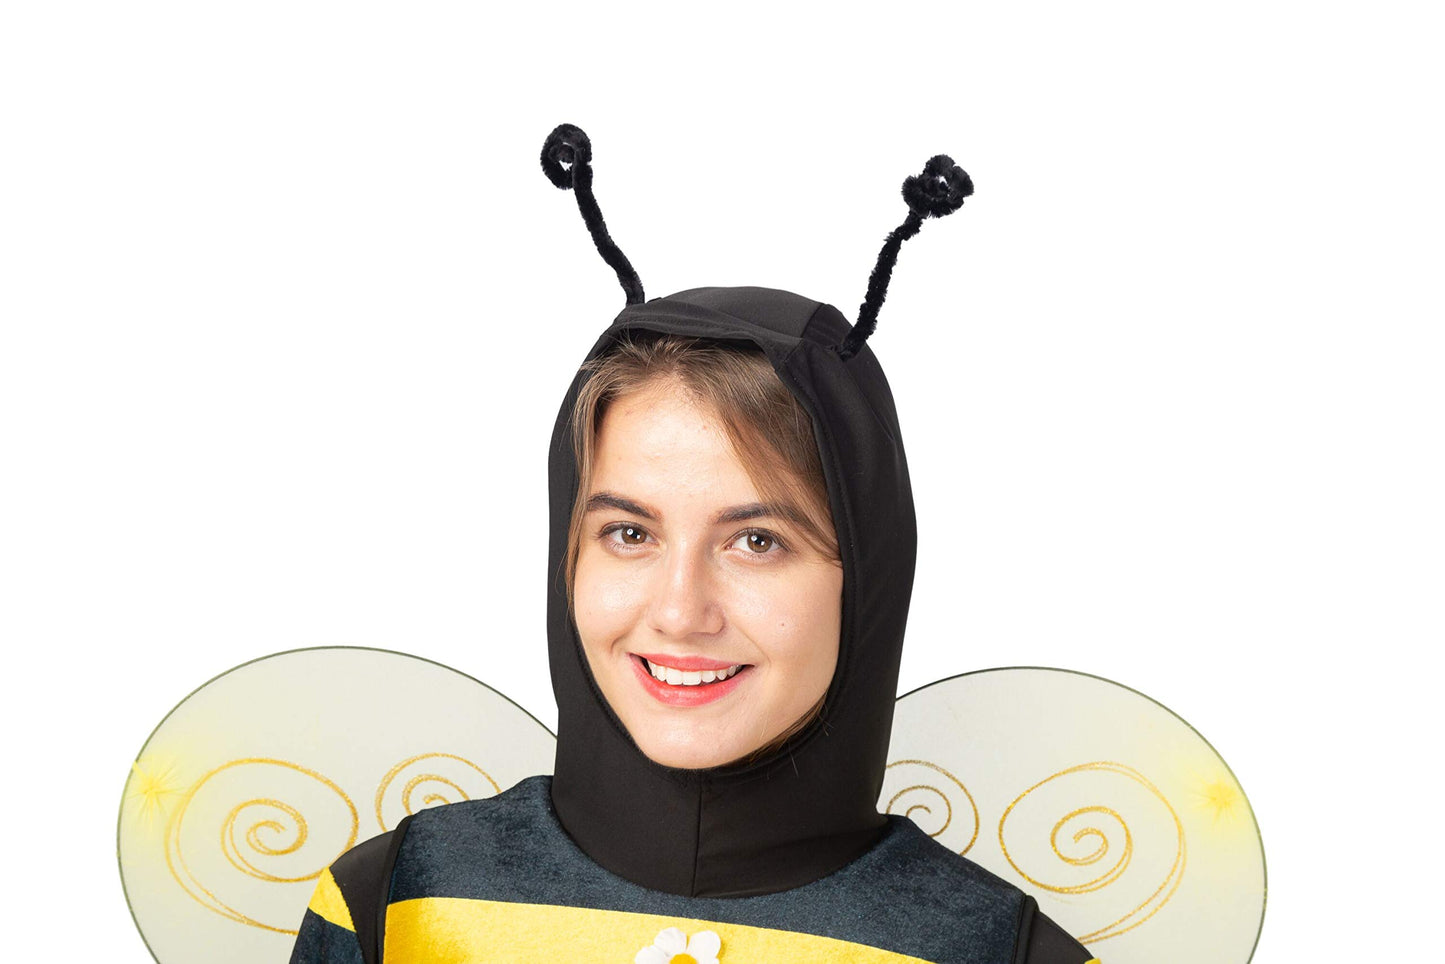 Adult Unisex Bee Yellow Costumes w/ Accessories for HalloweenCosplay, Role play